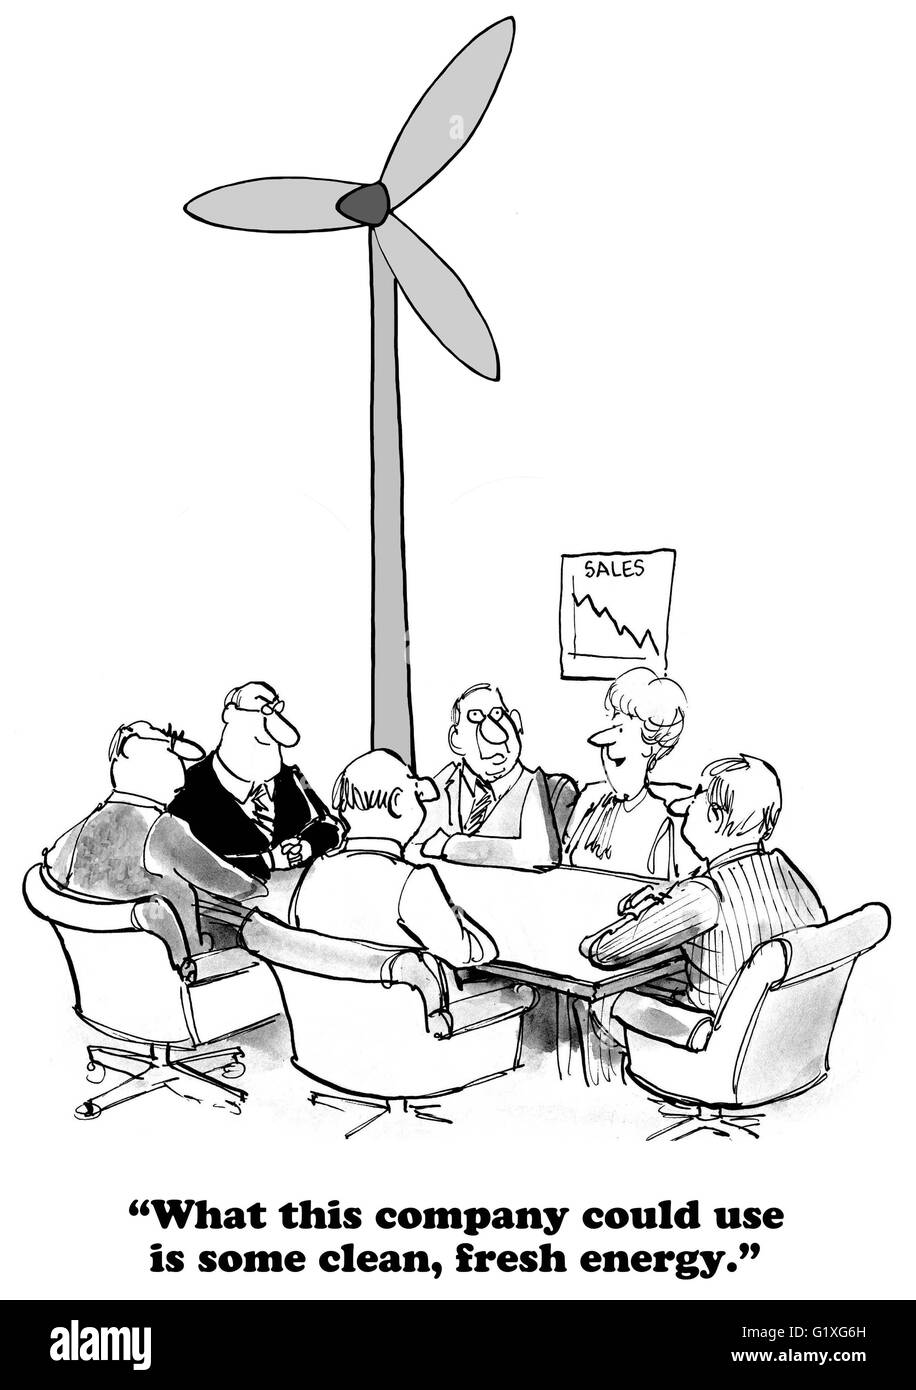 Business cartoon about need fresh, new energy in the company. Stock Photo